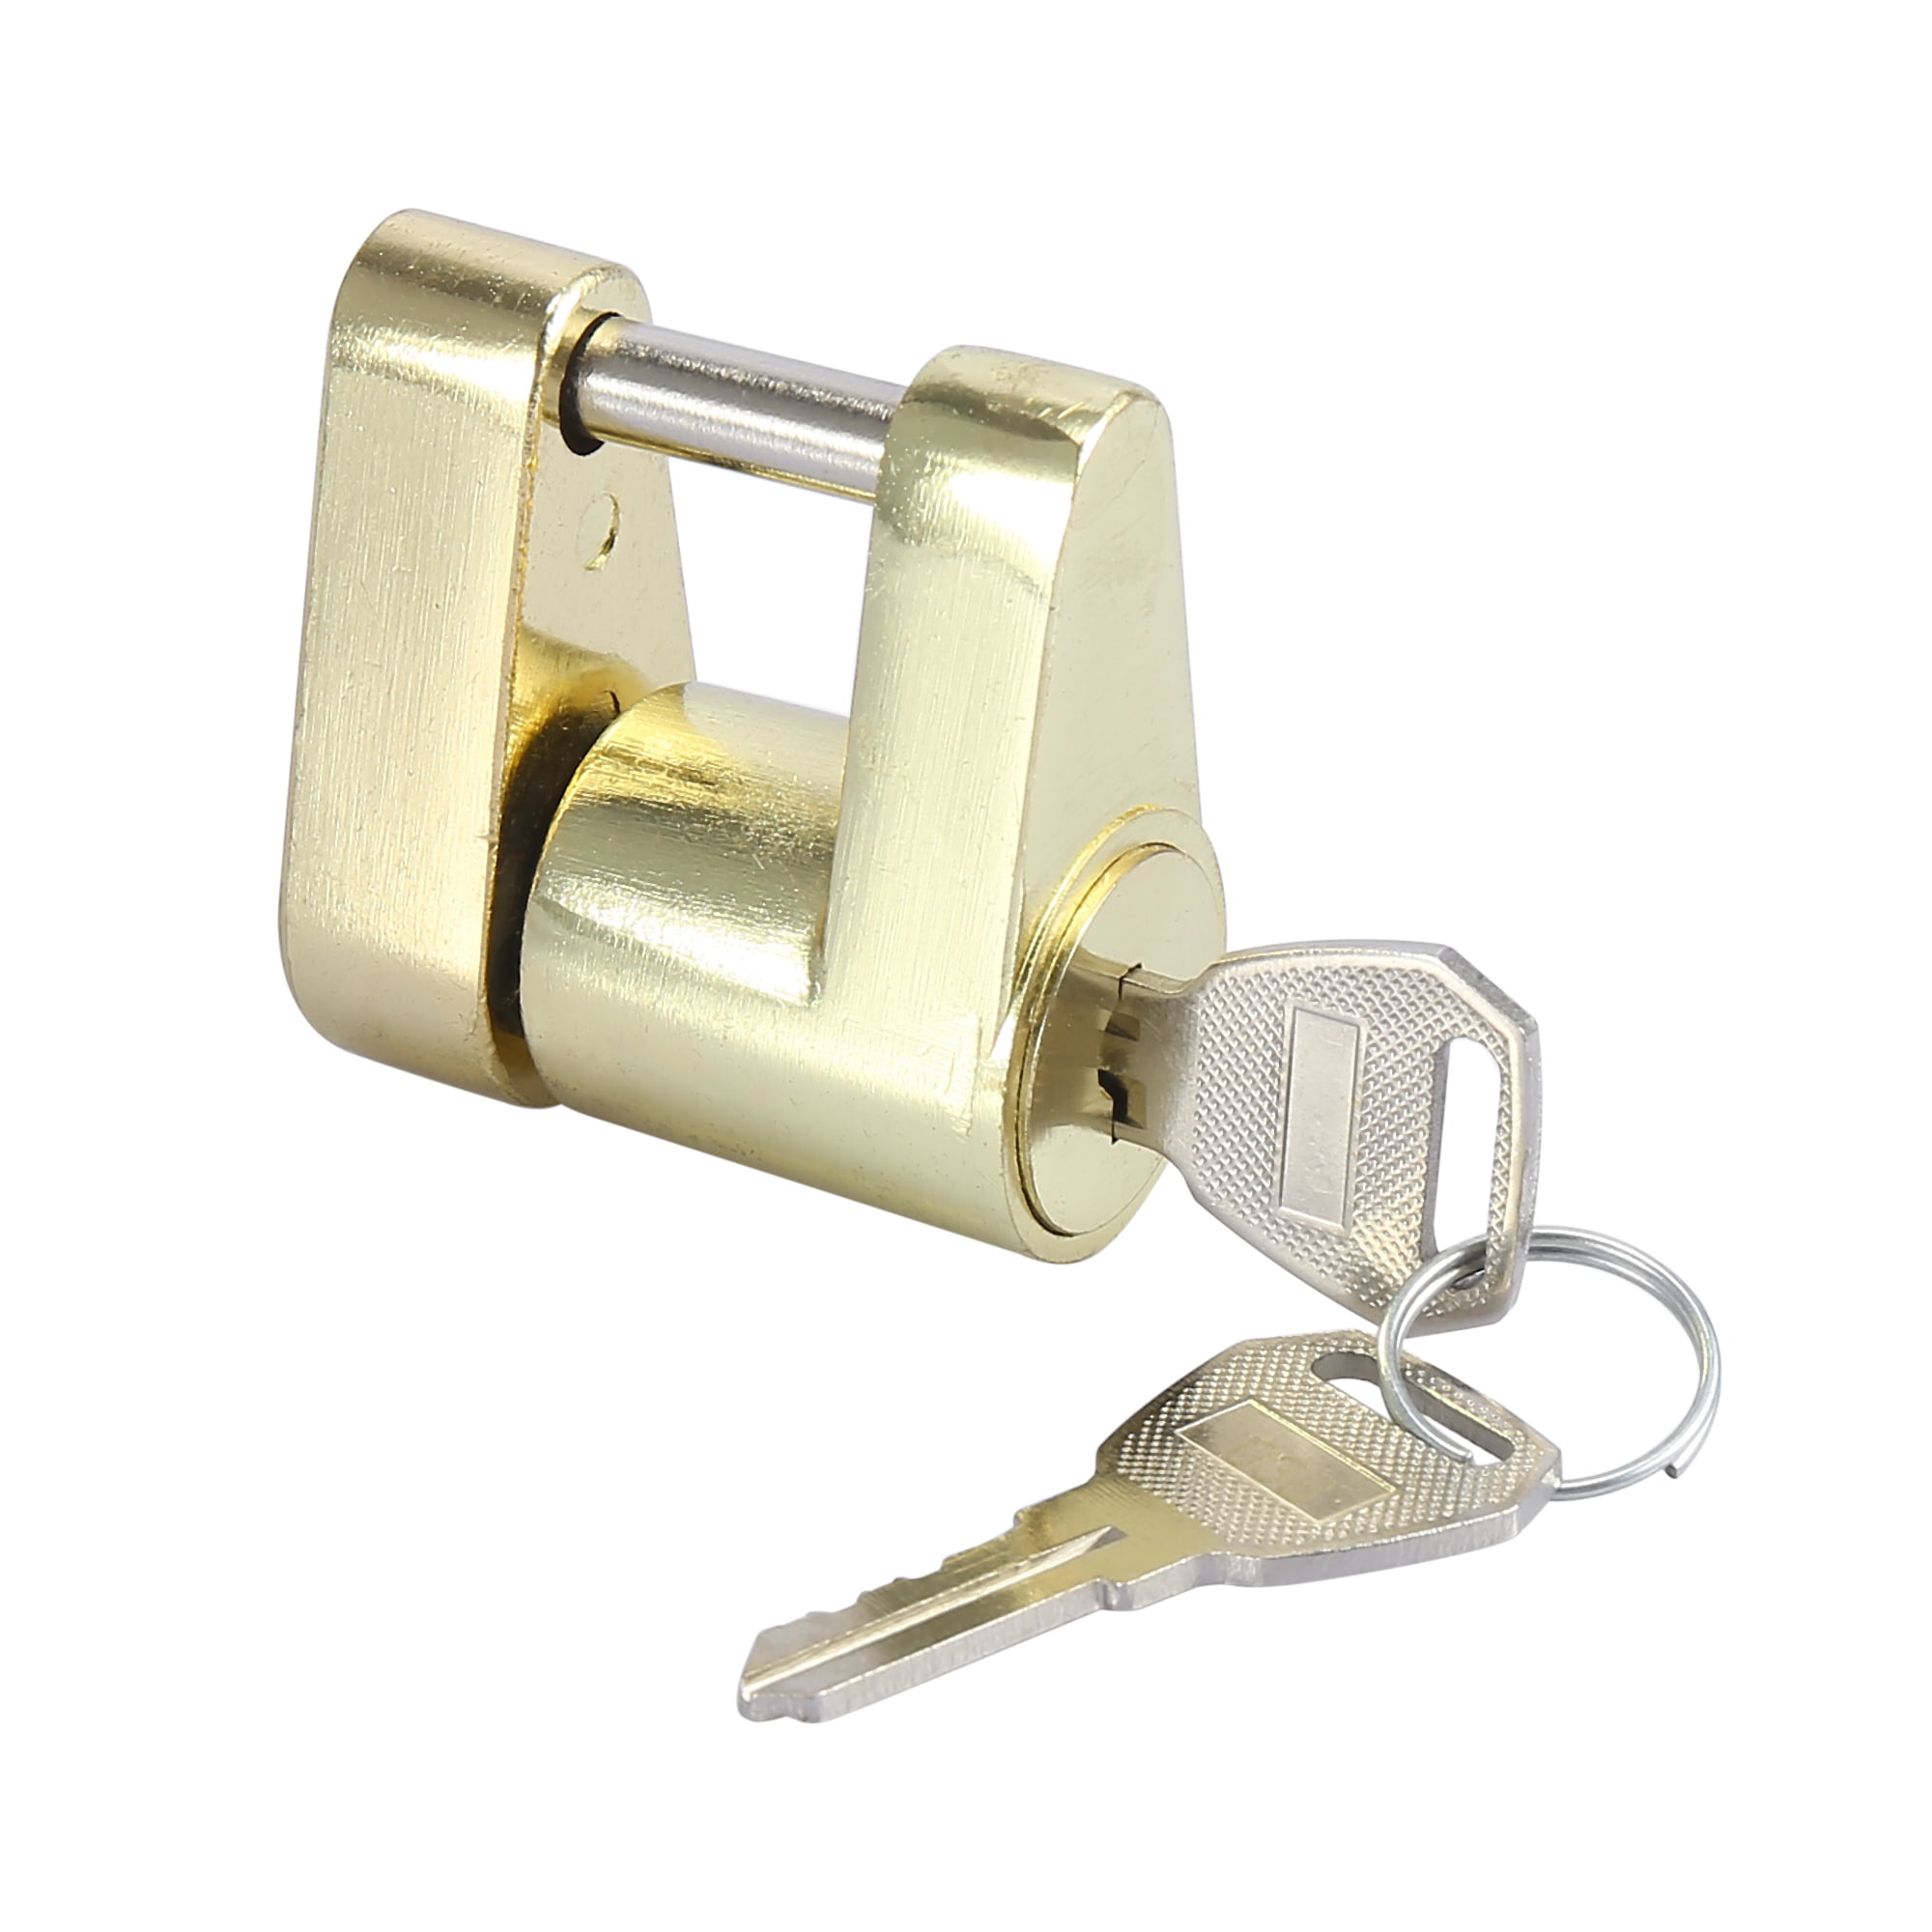 Steel Coupling Safe with Padlock and Keys Trailer Coupling Hitch Security Lock 